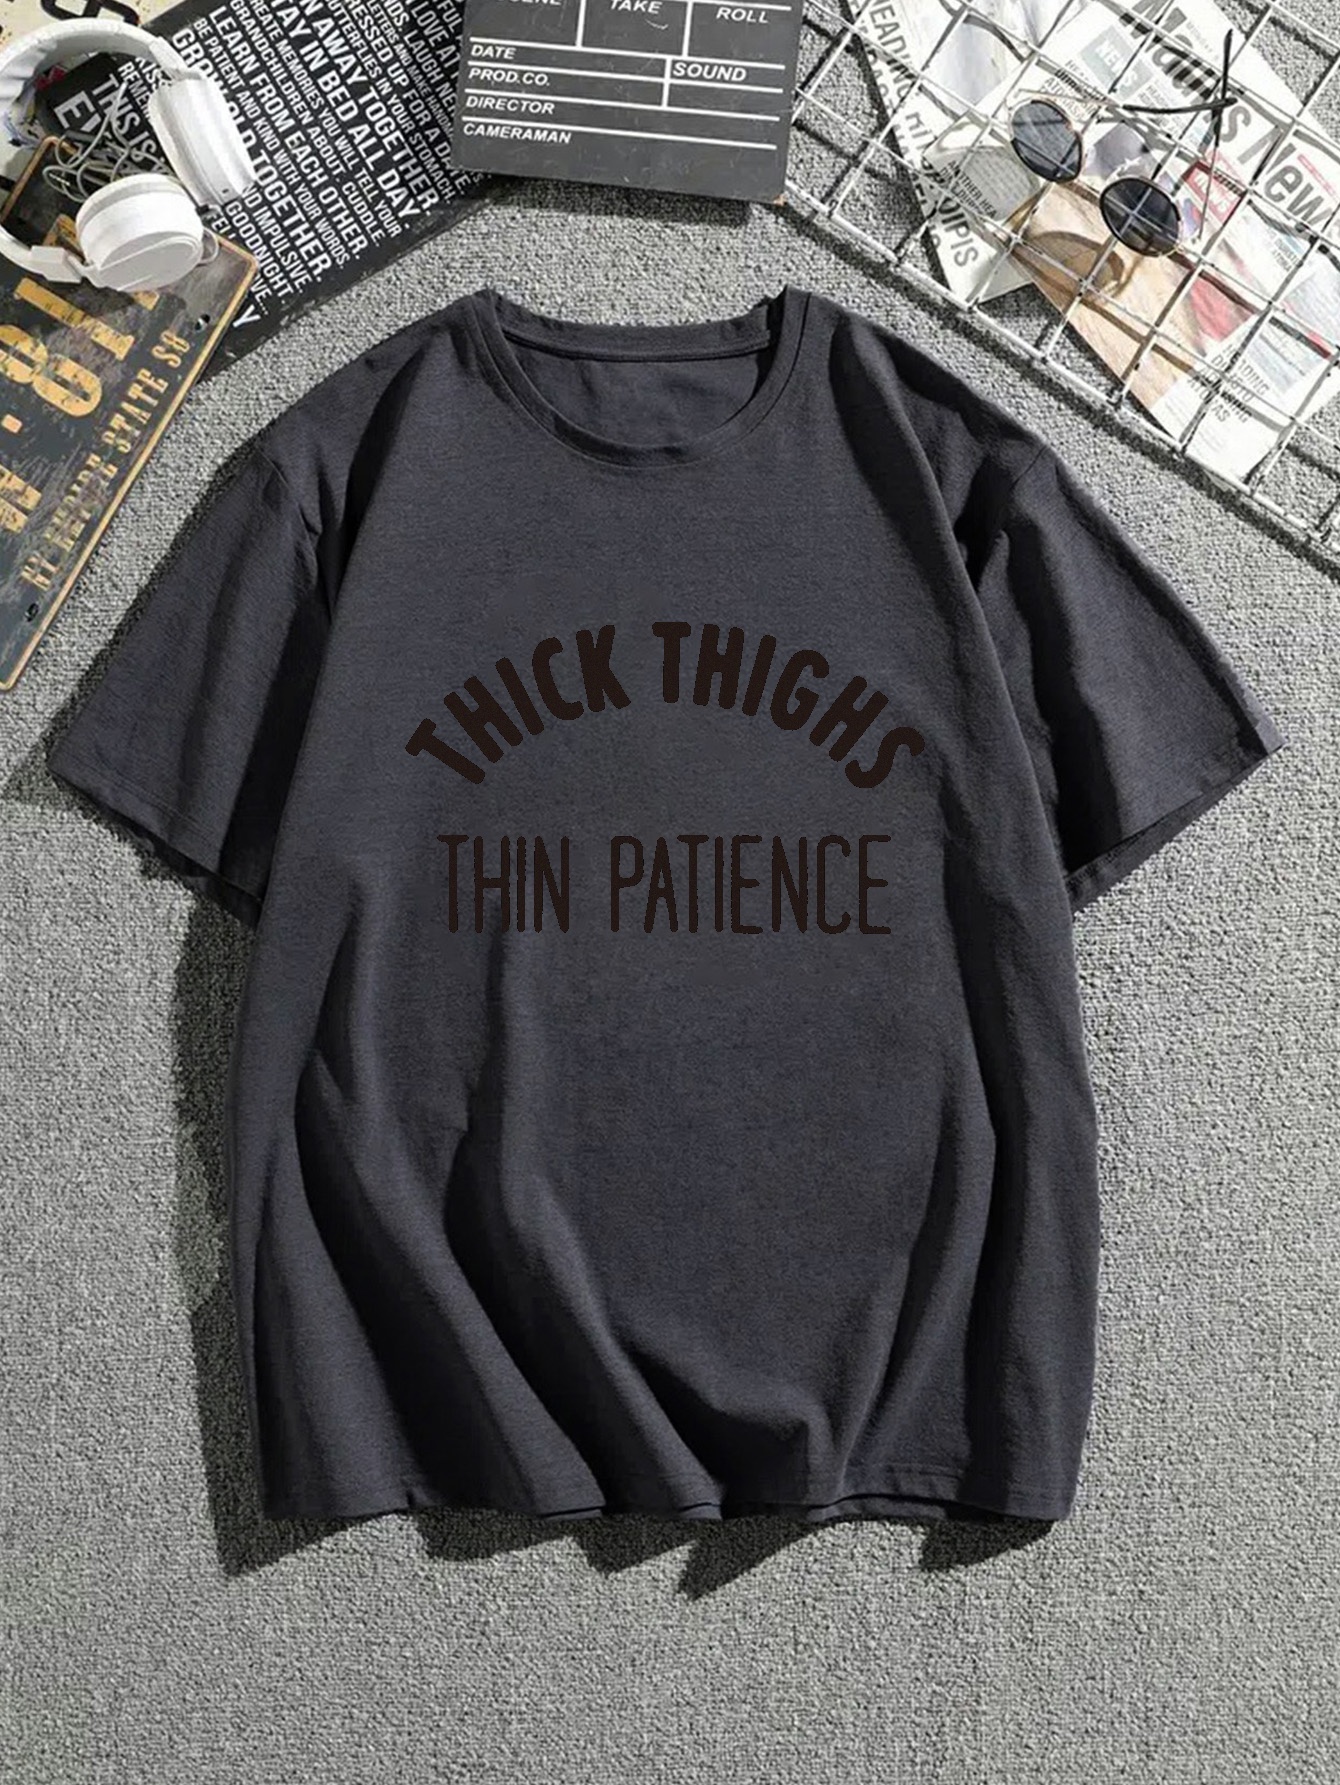 Thick Thighs Thin Patience T-shirt, Thick Thighs T-shirt, Thick Thighs  Shirt -  Canada